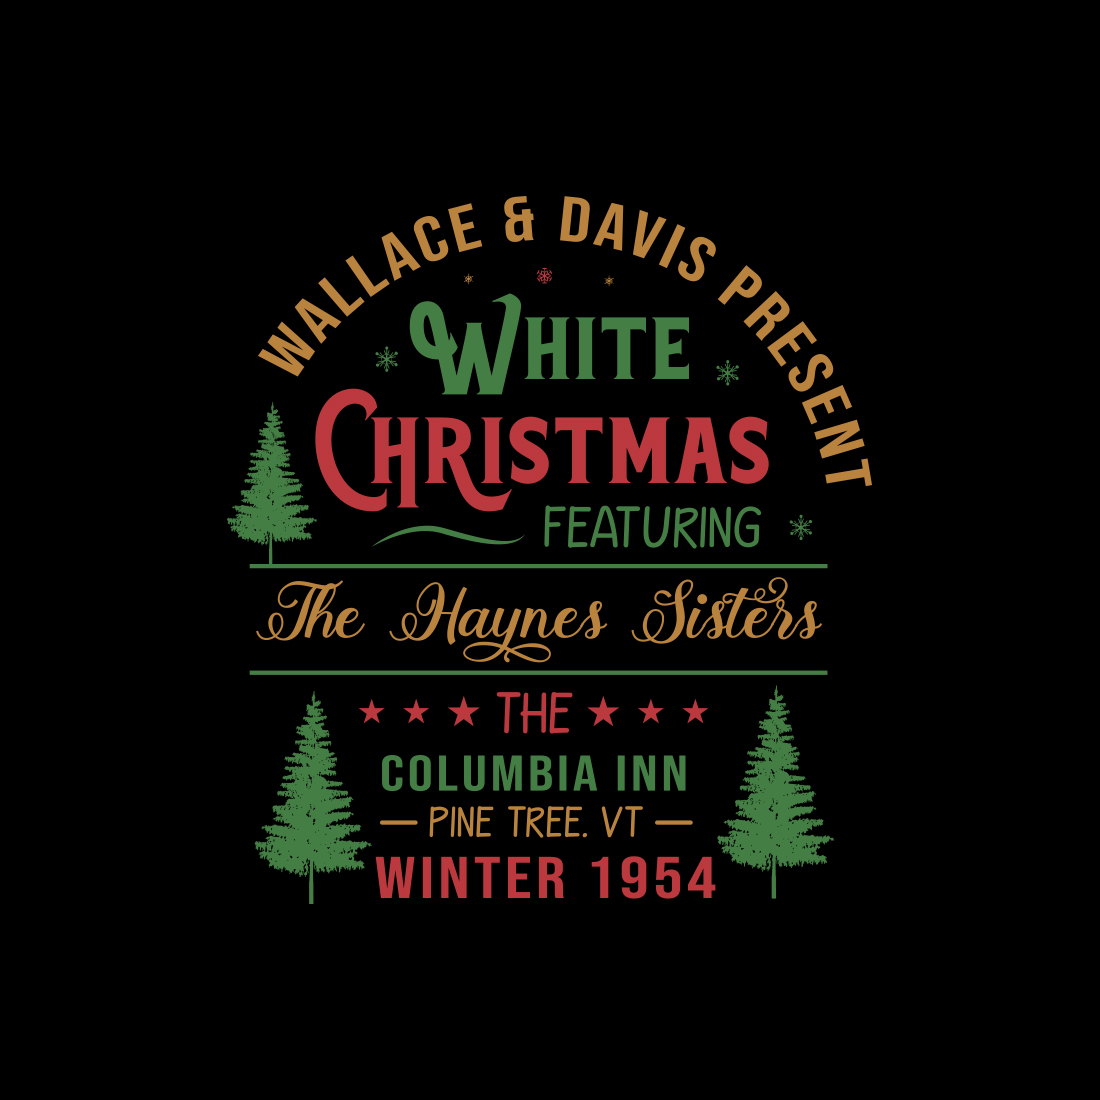 wallace & davis present white christmas featuring the haynes sisters the columbia inn pine tree vt winter 1954 T-shirt design preview image.